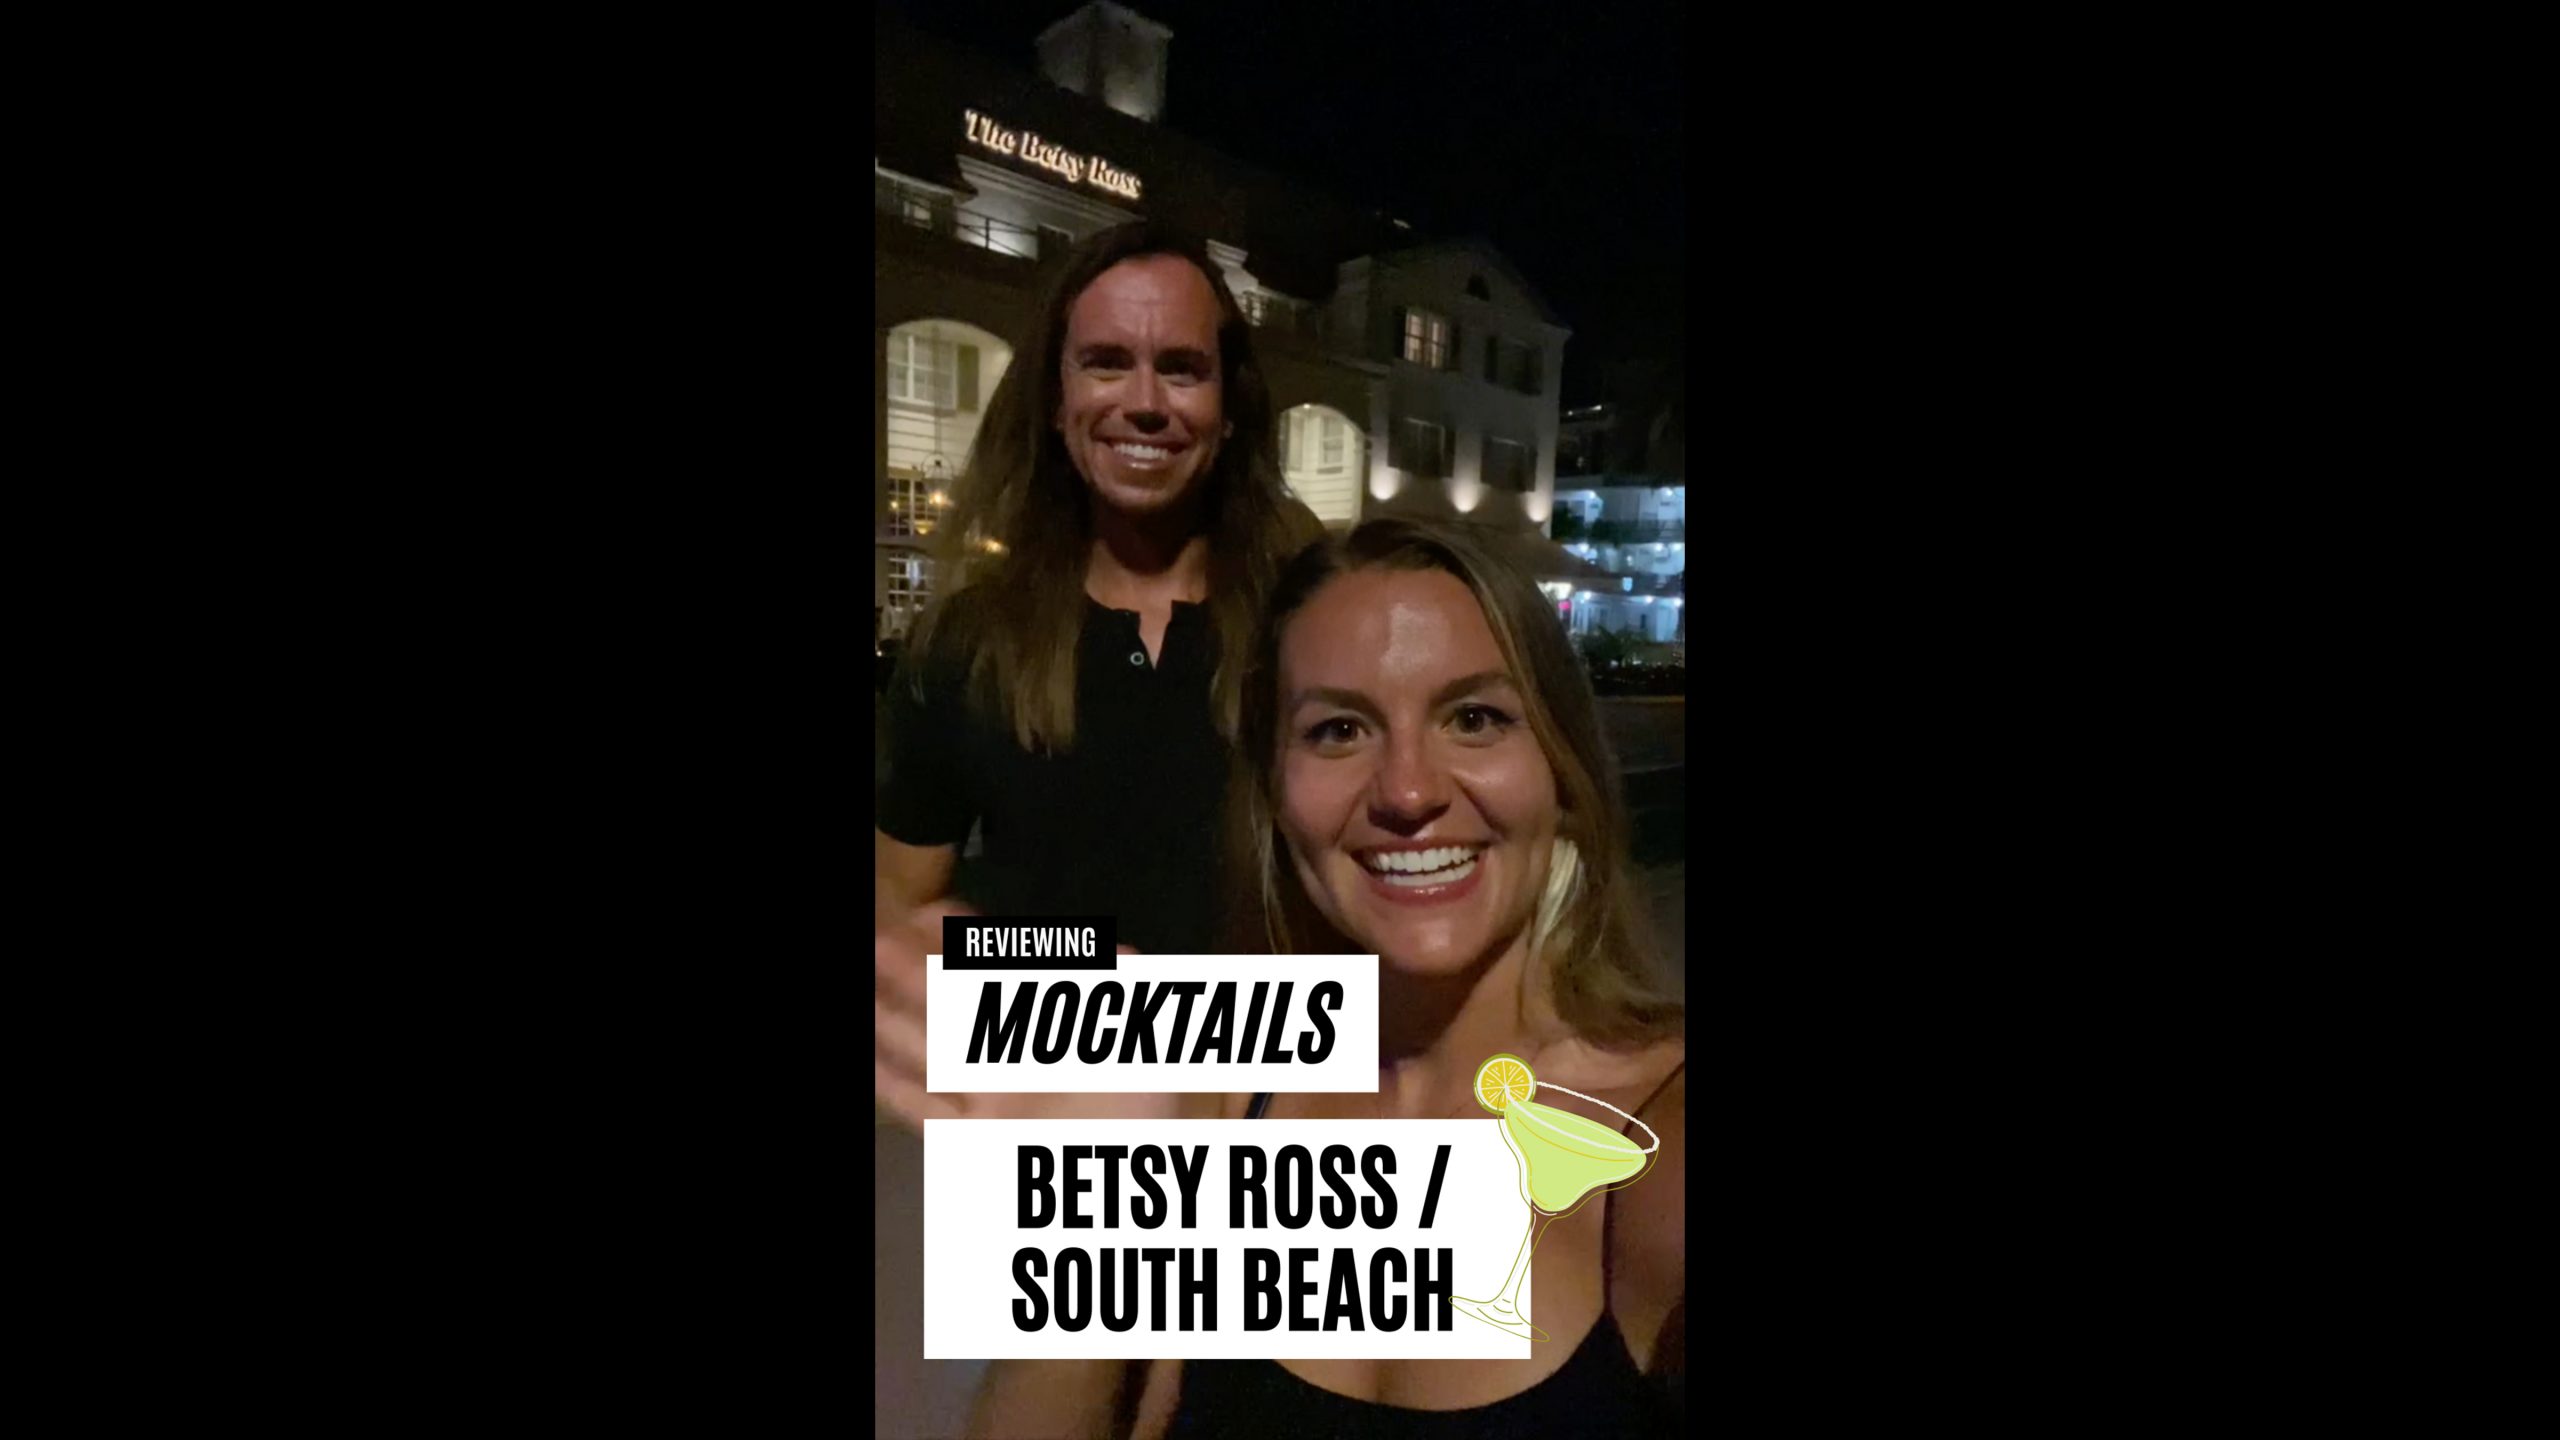 South Beach Mocktail Reviews (Part 1): Betsy Ross Hotel